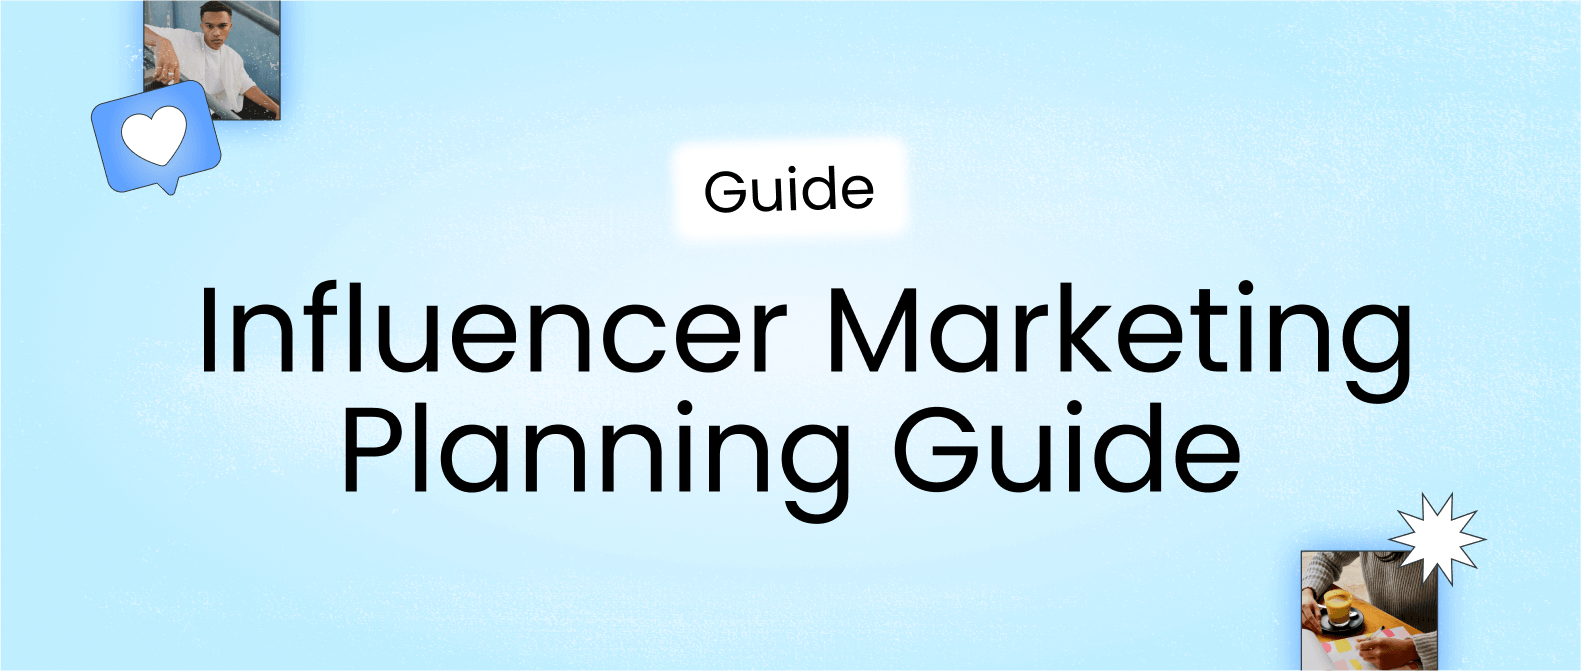 Header image for Later’s influencer marketing planning guide